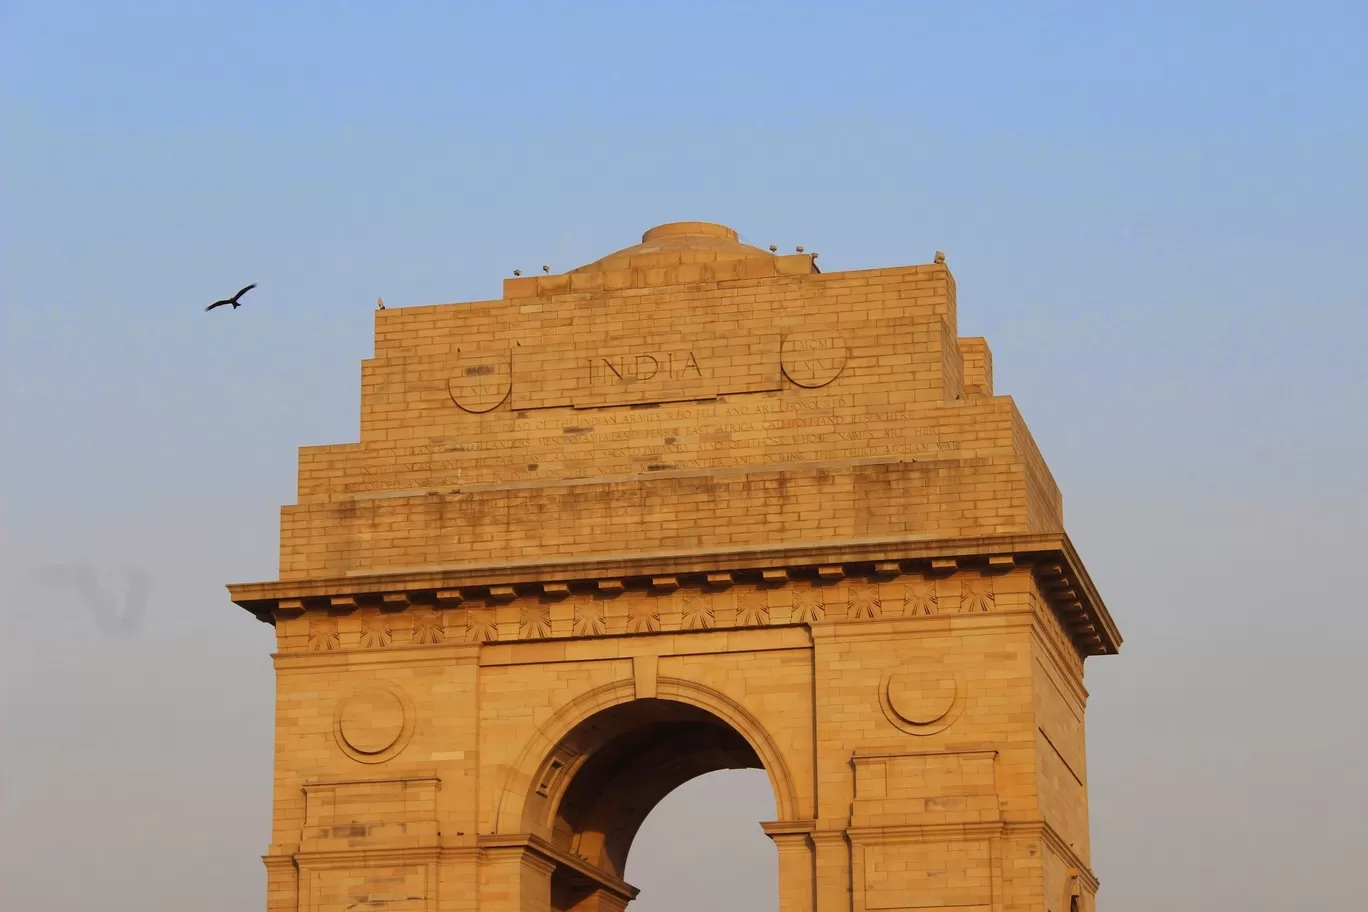 Photo of India Gate By Praveen Vendra